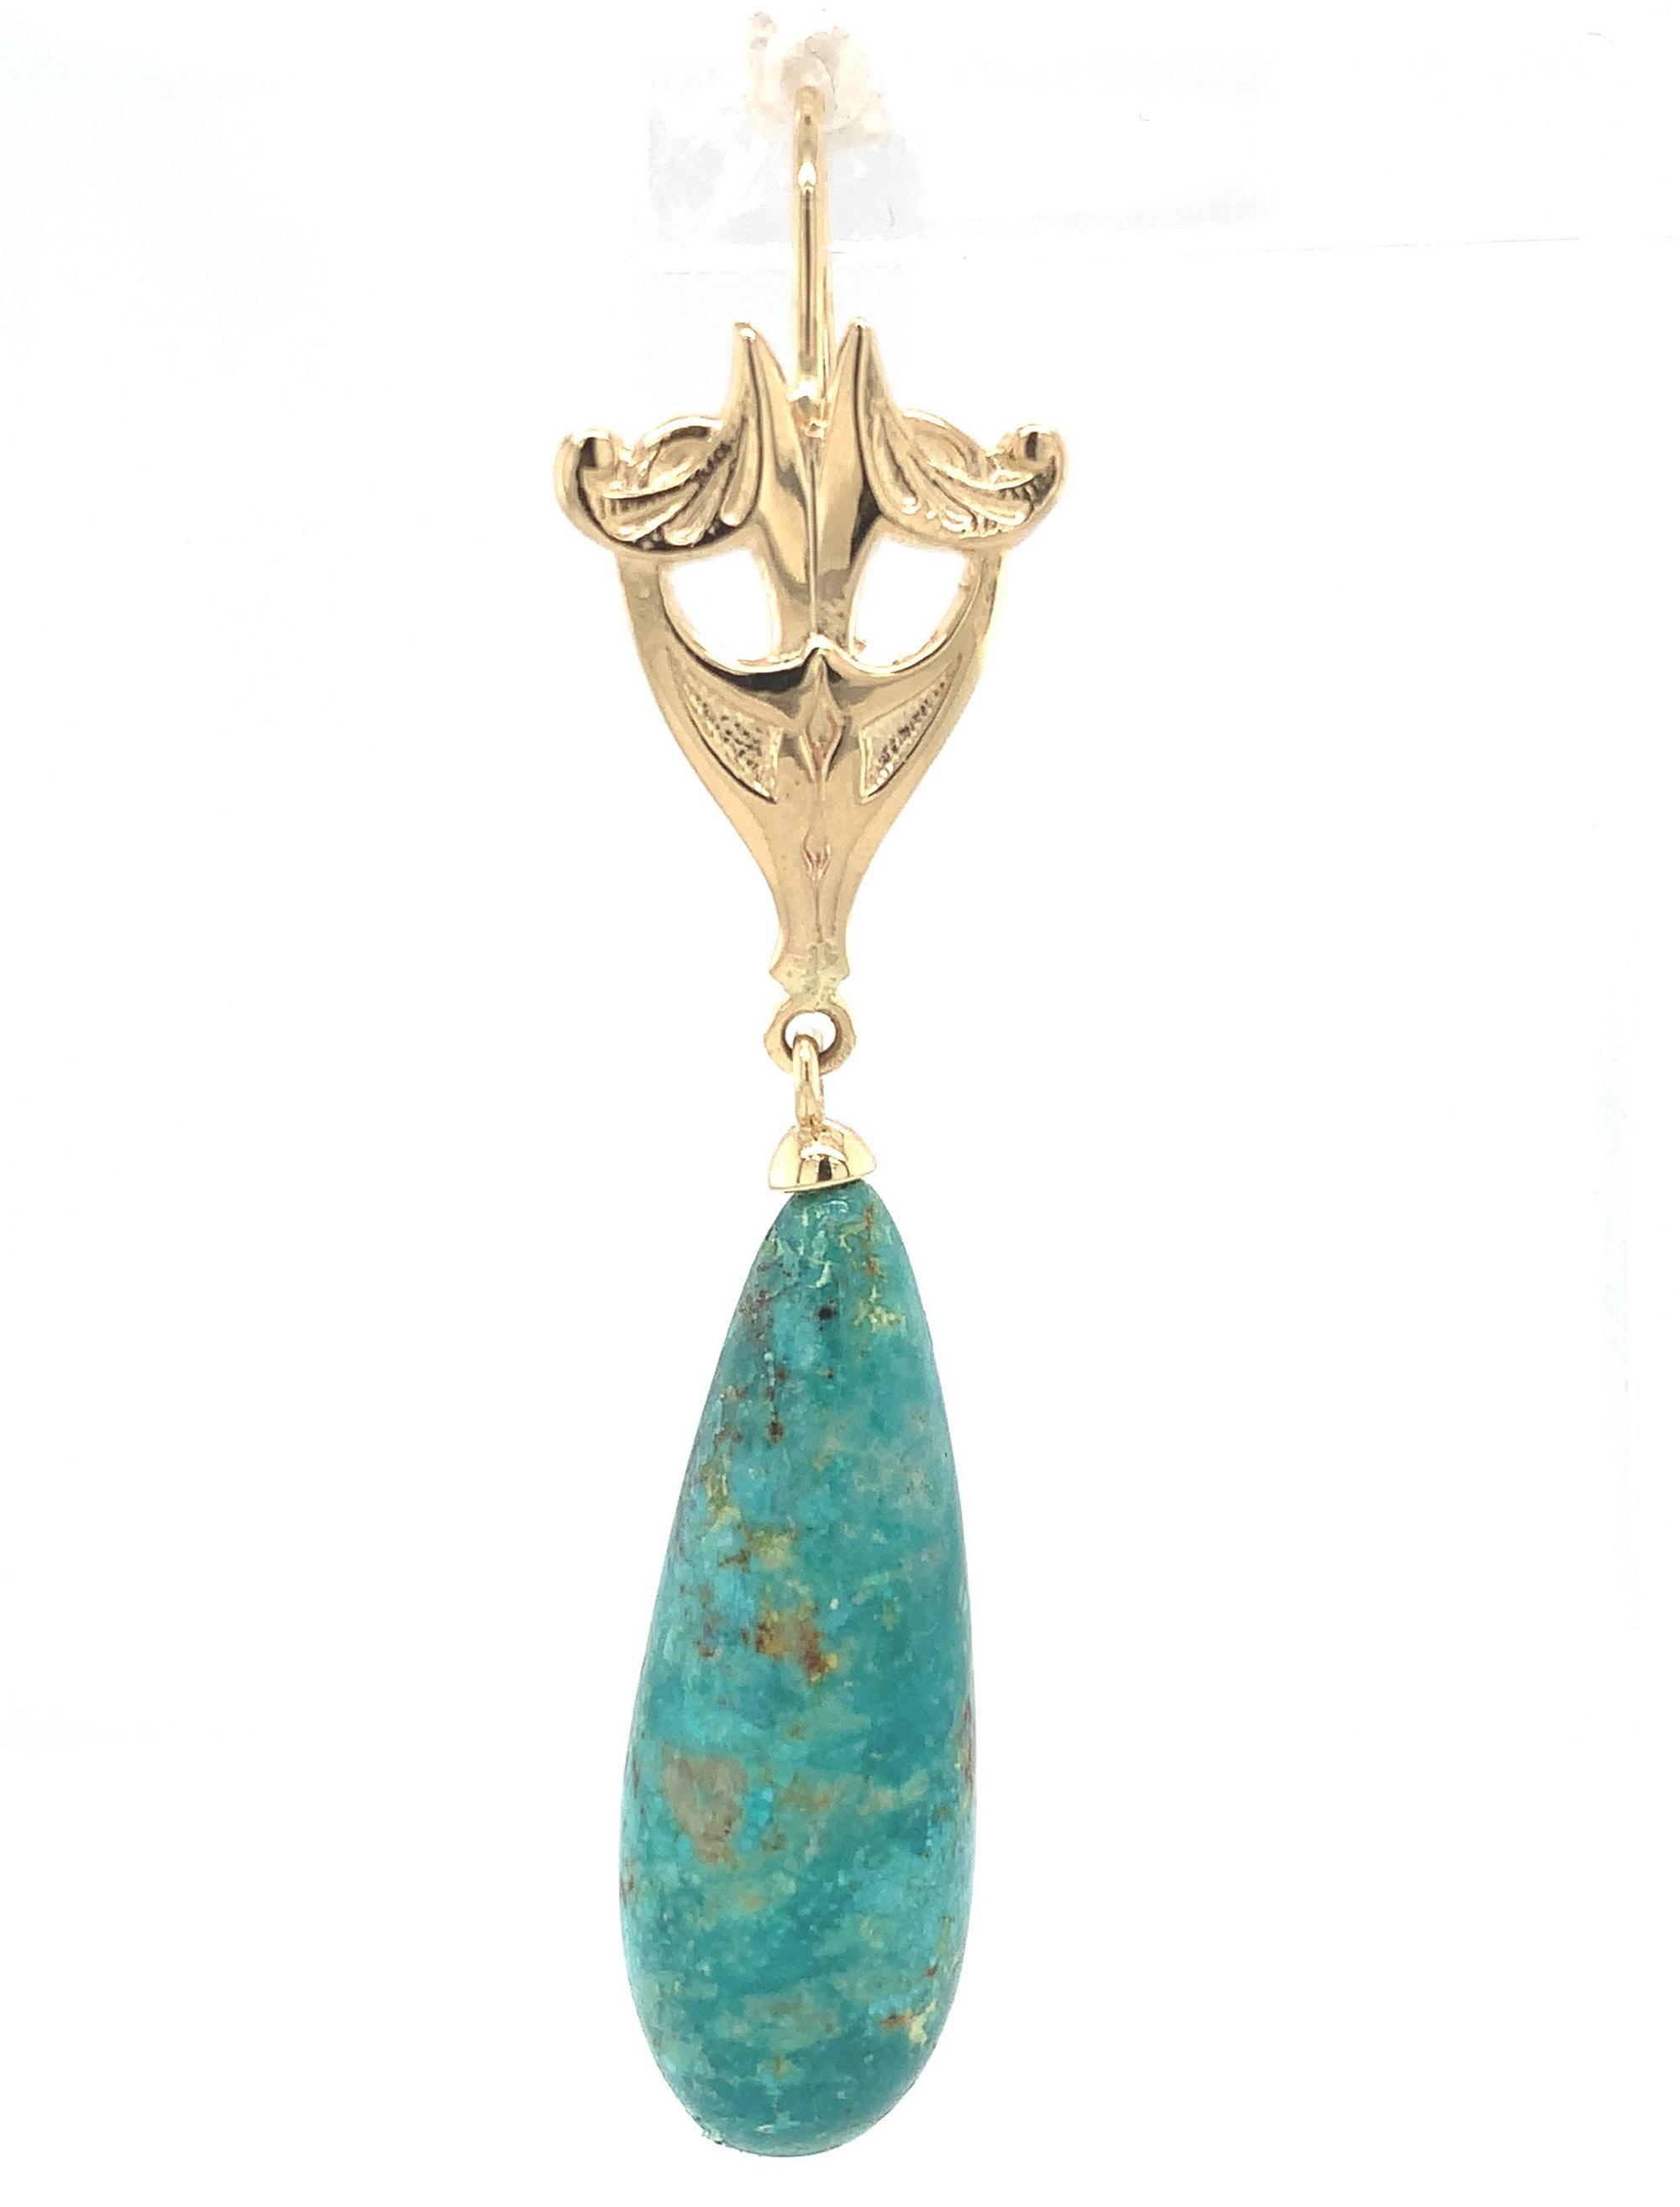 14k yellow gold earrings featuring a pair of large turquoise smooth briolettes weighing over 47 carats total weight. The turquoise hangs from Art Nouveau era casting newly made from the antique molds.  The turquoise are a mottled light to dark green